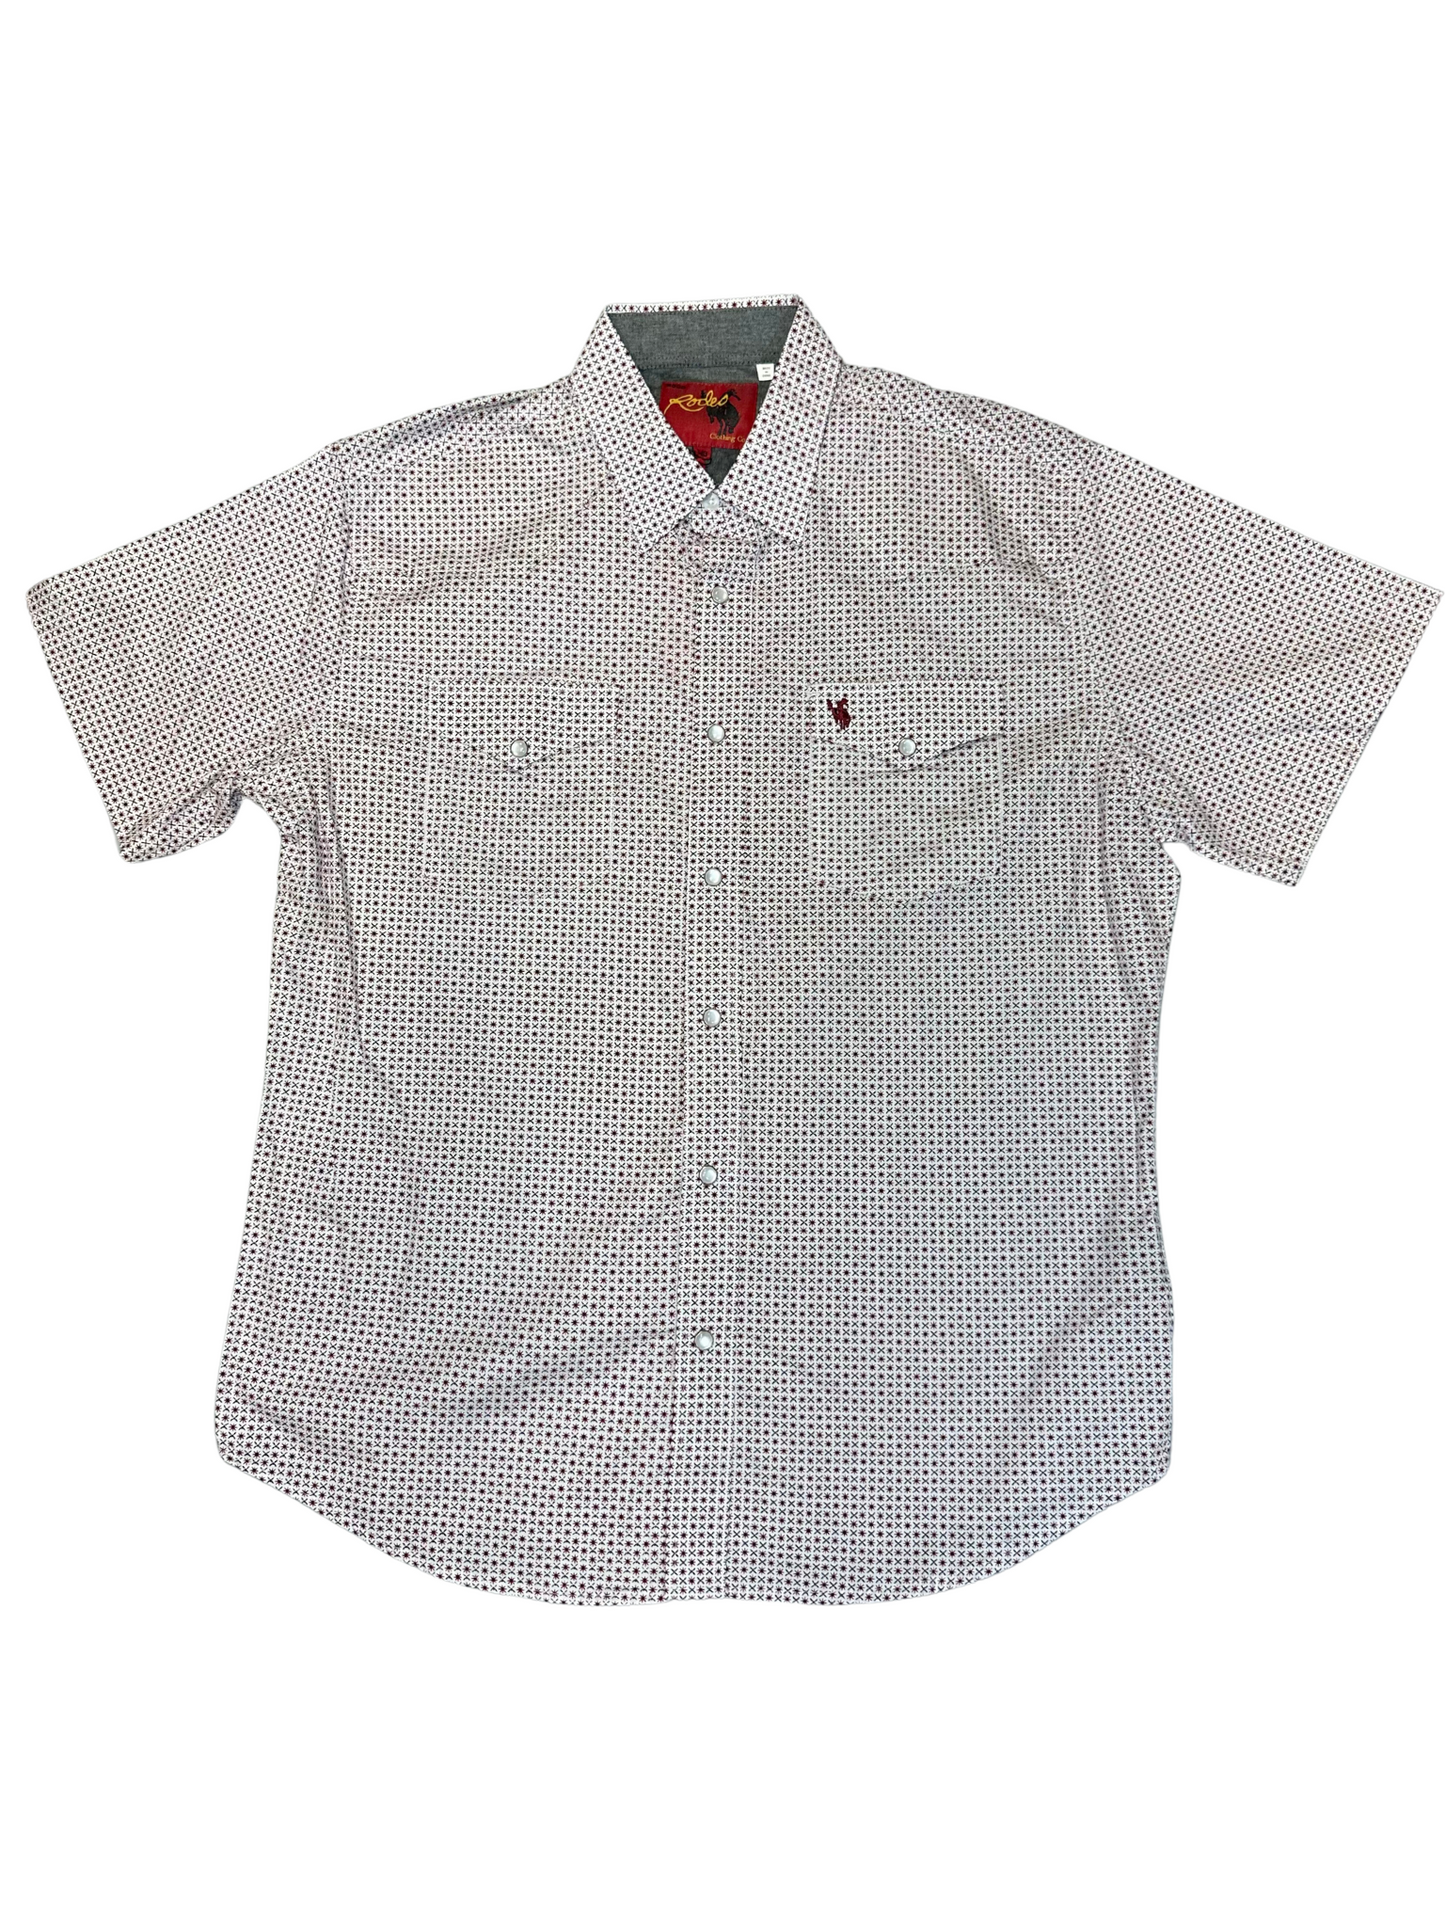 Men's Rodeo White/Red Short Sleeve Button Down Shirt